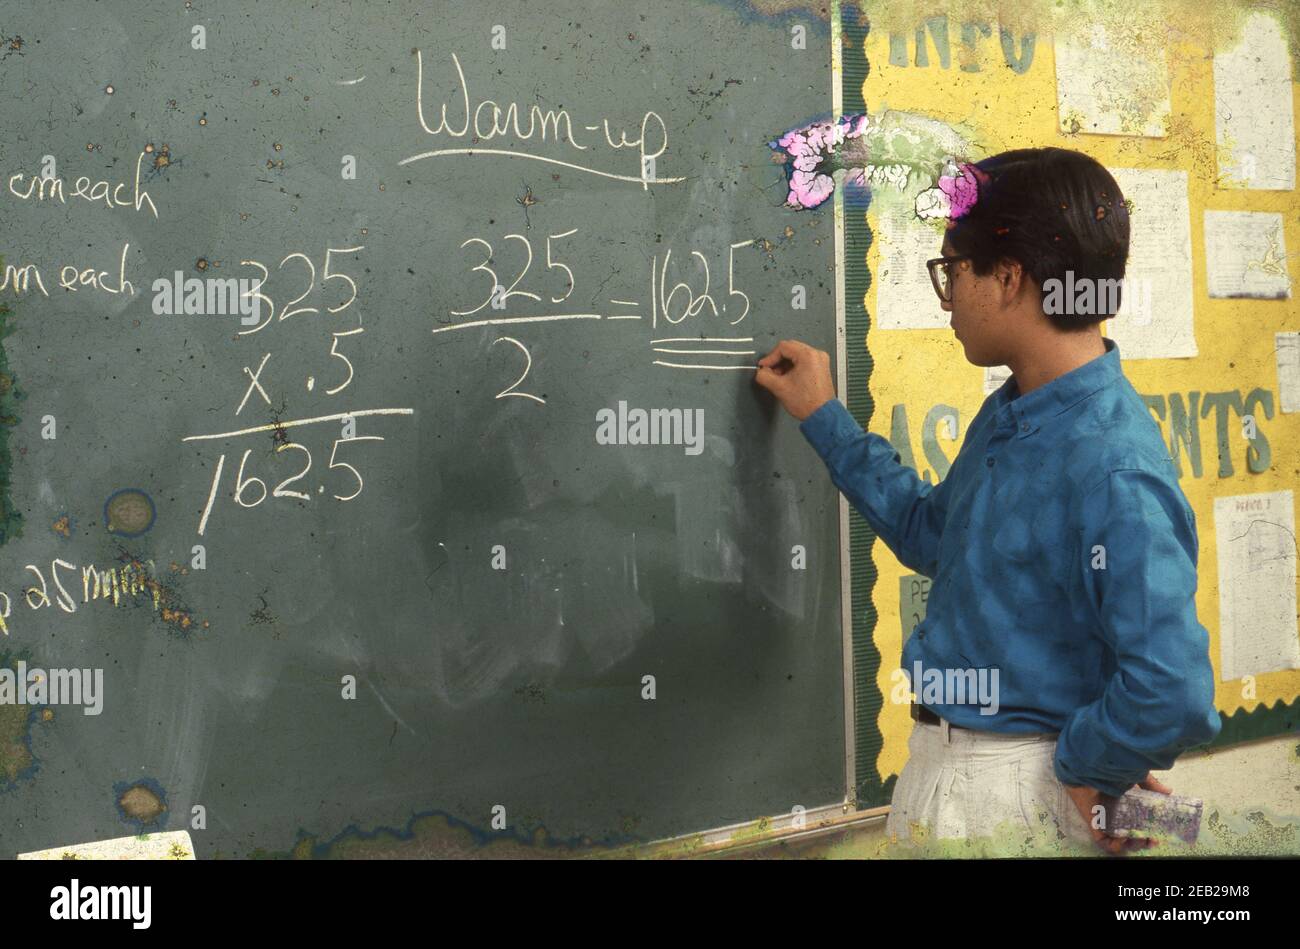 Austin, Texas USA: Male Hispanic high school student works out a math problem on a blackboard during class. ©1989 Bob Daemmrich  Model Release RE-046    BAD6814C Stock Photo